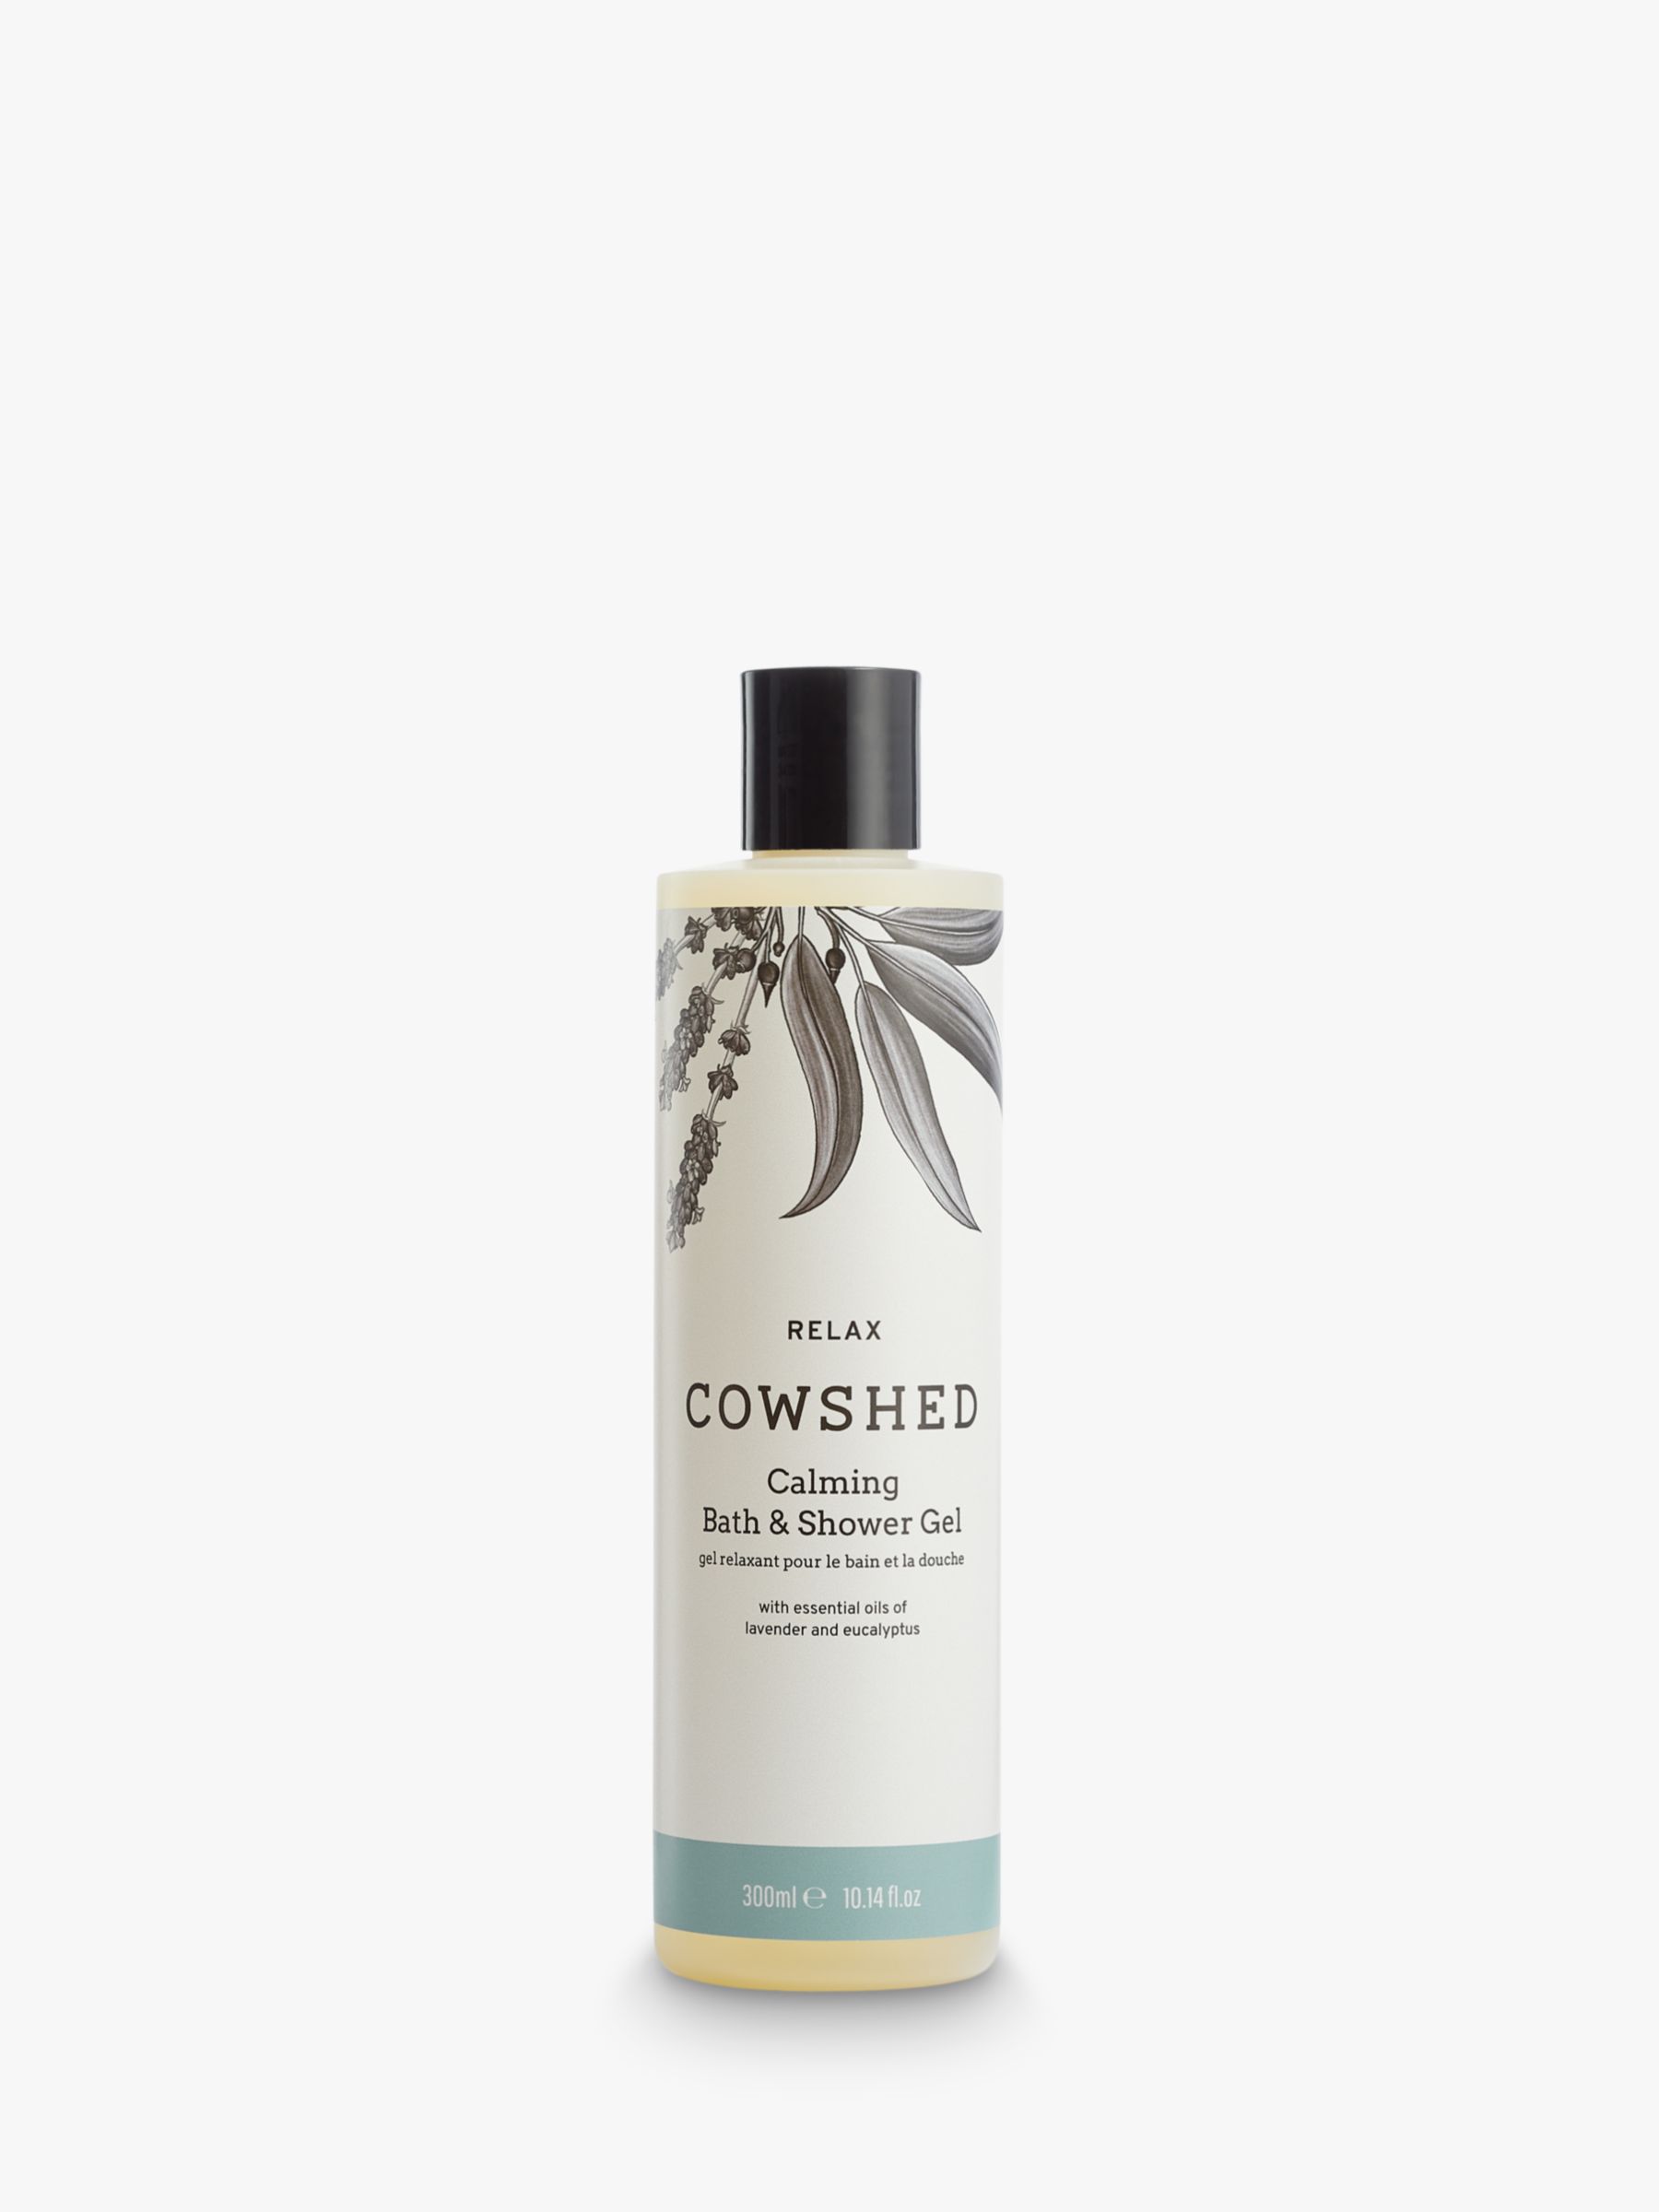 Cowshed Relax Calming Bath & Shower Gel, 300ml 1